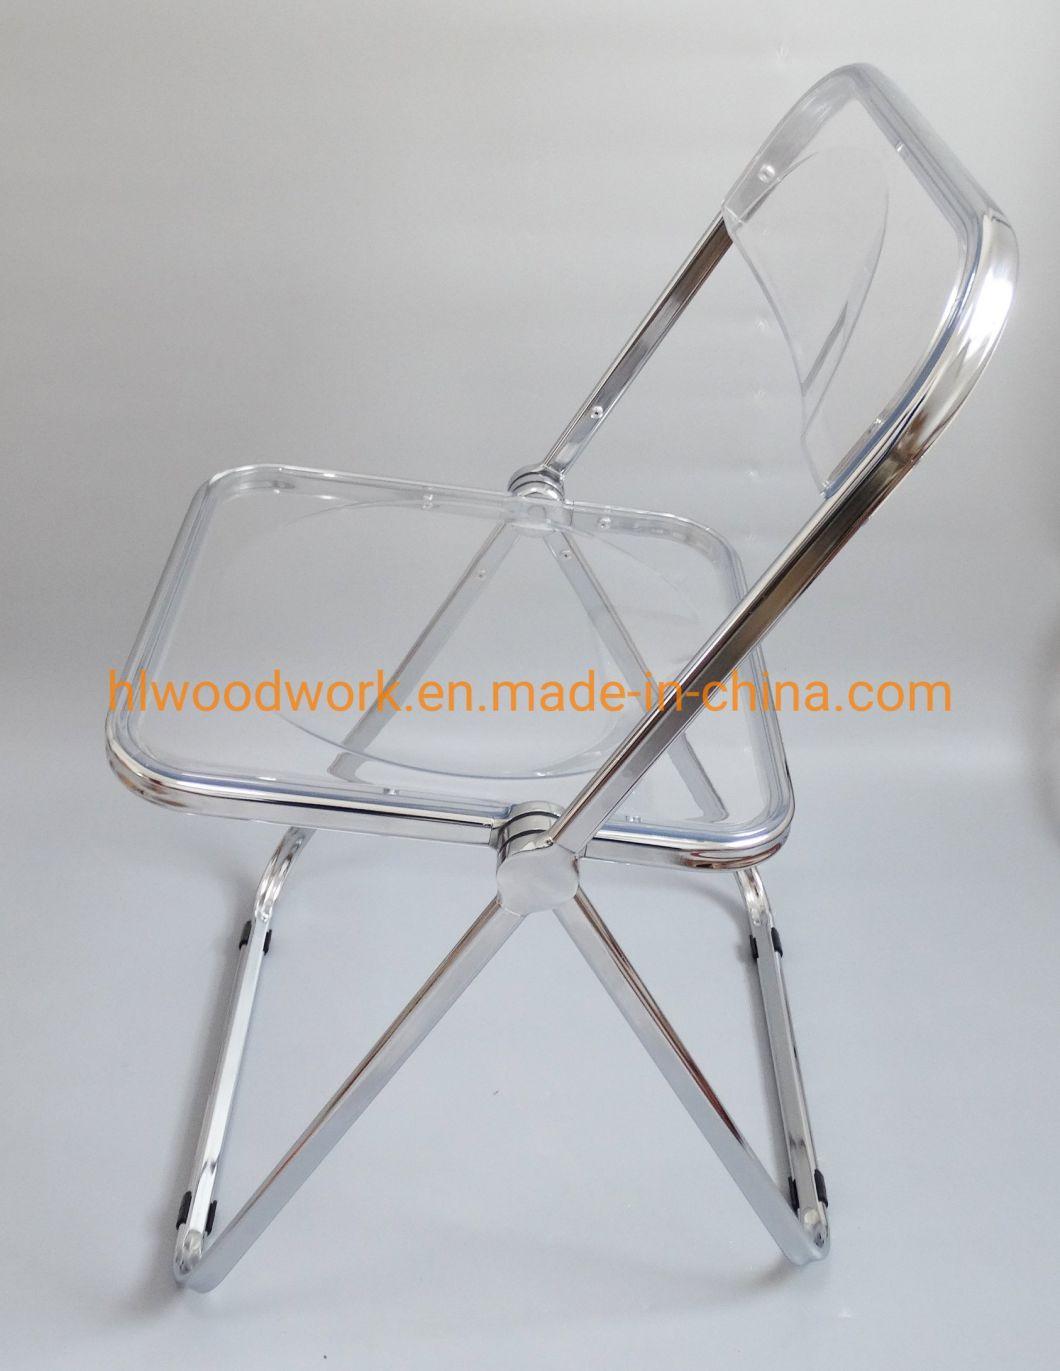 Modern Transparent Red Folding Chair PC Plastic Outdoor Chair Chrome Frame Office Bar Dining Leisure Banquet Wedding Meeting Chair Plastic Dining Chair